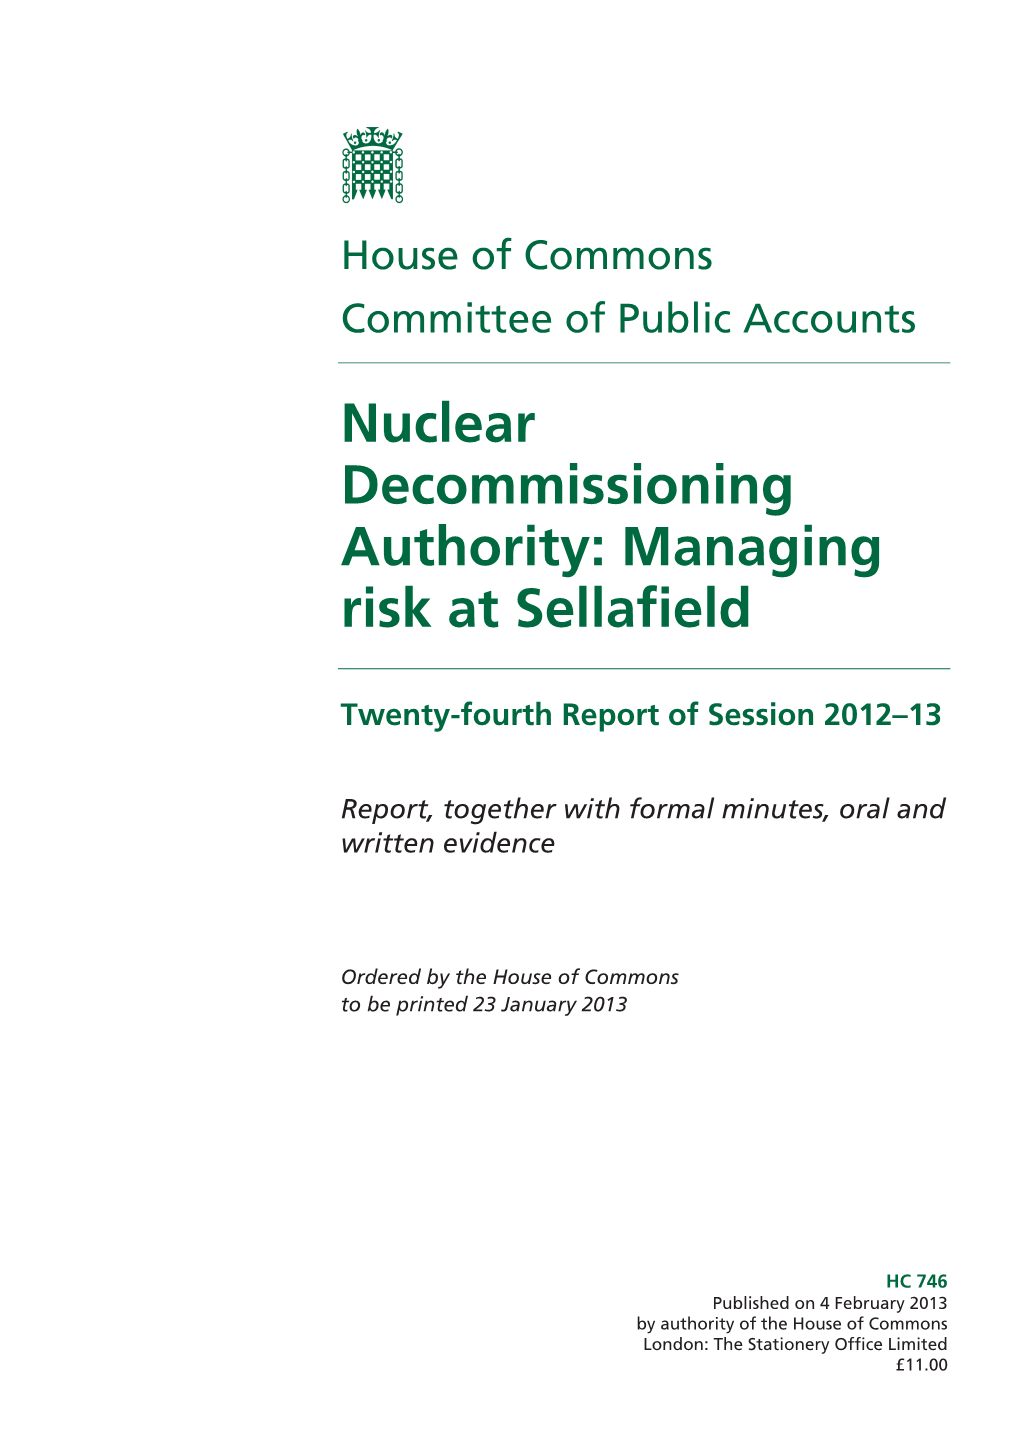 Nuclear Decommissioning Authority: Managing Risk at Sellafield